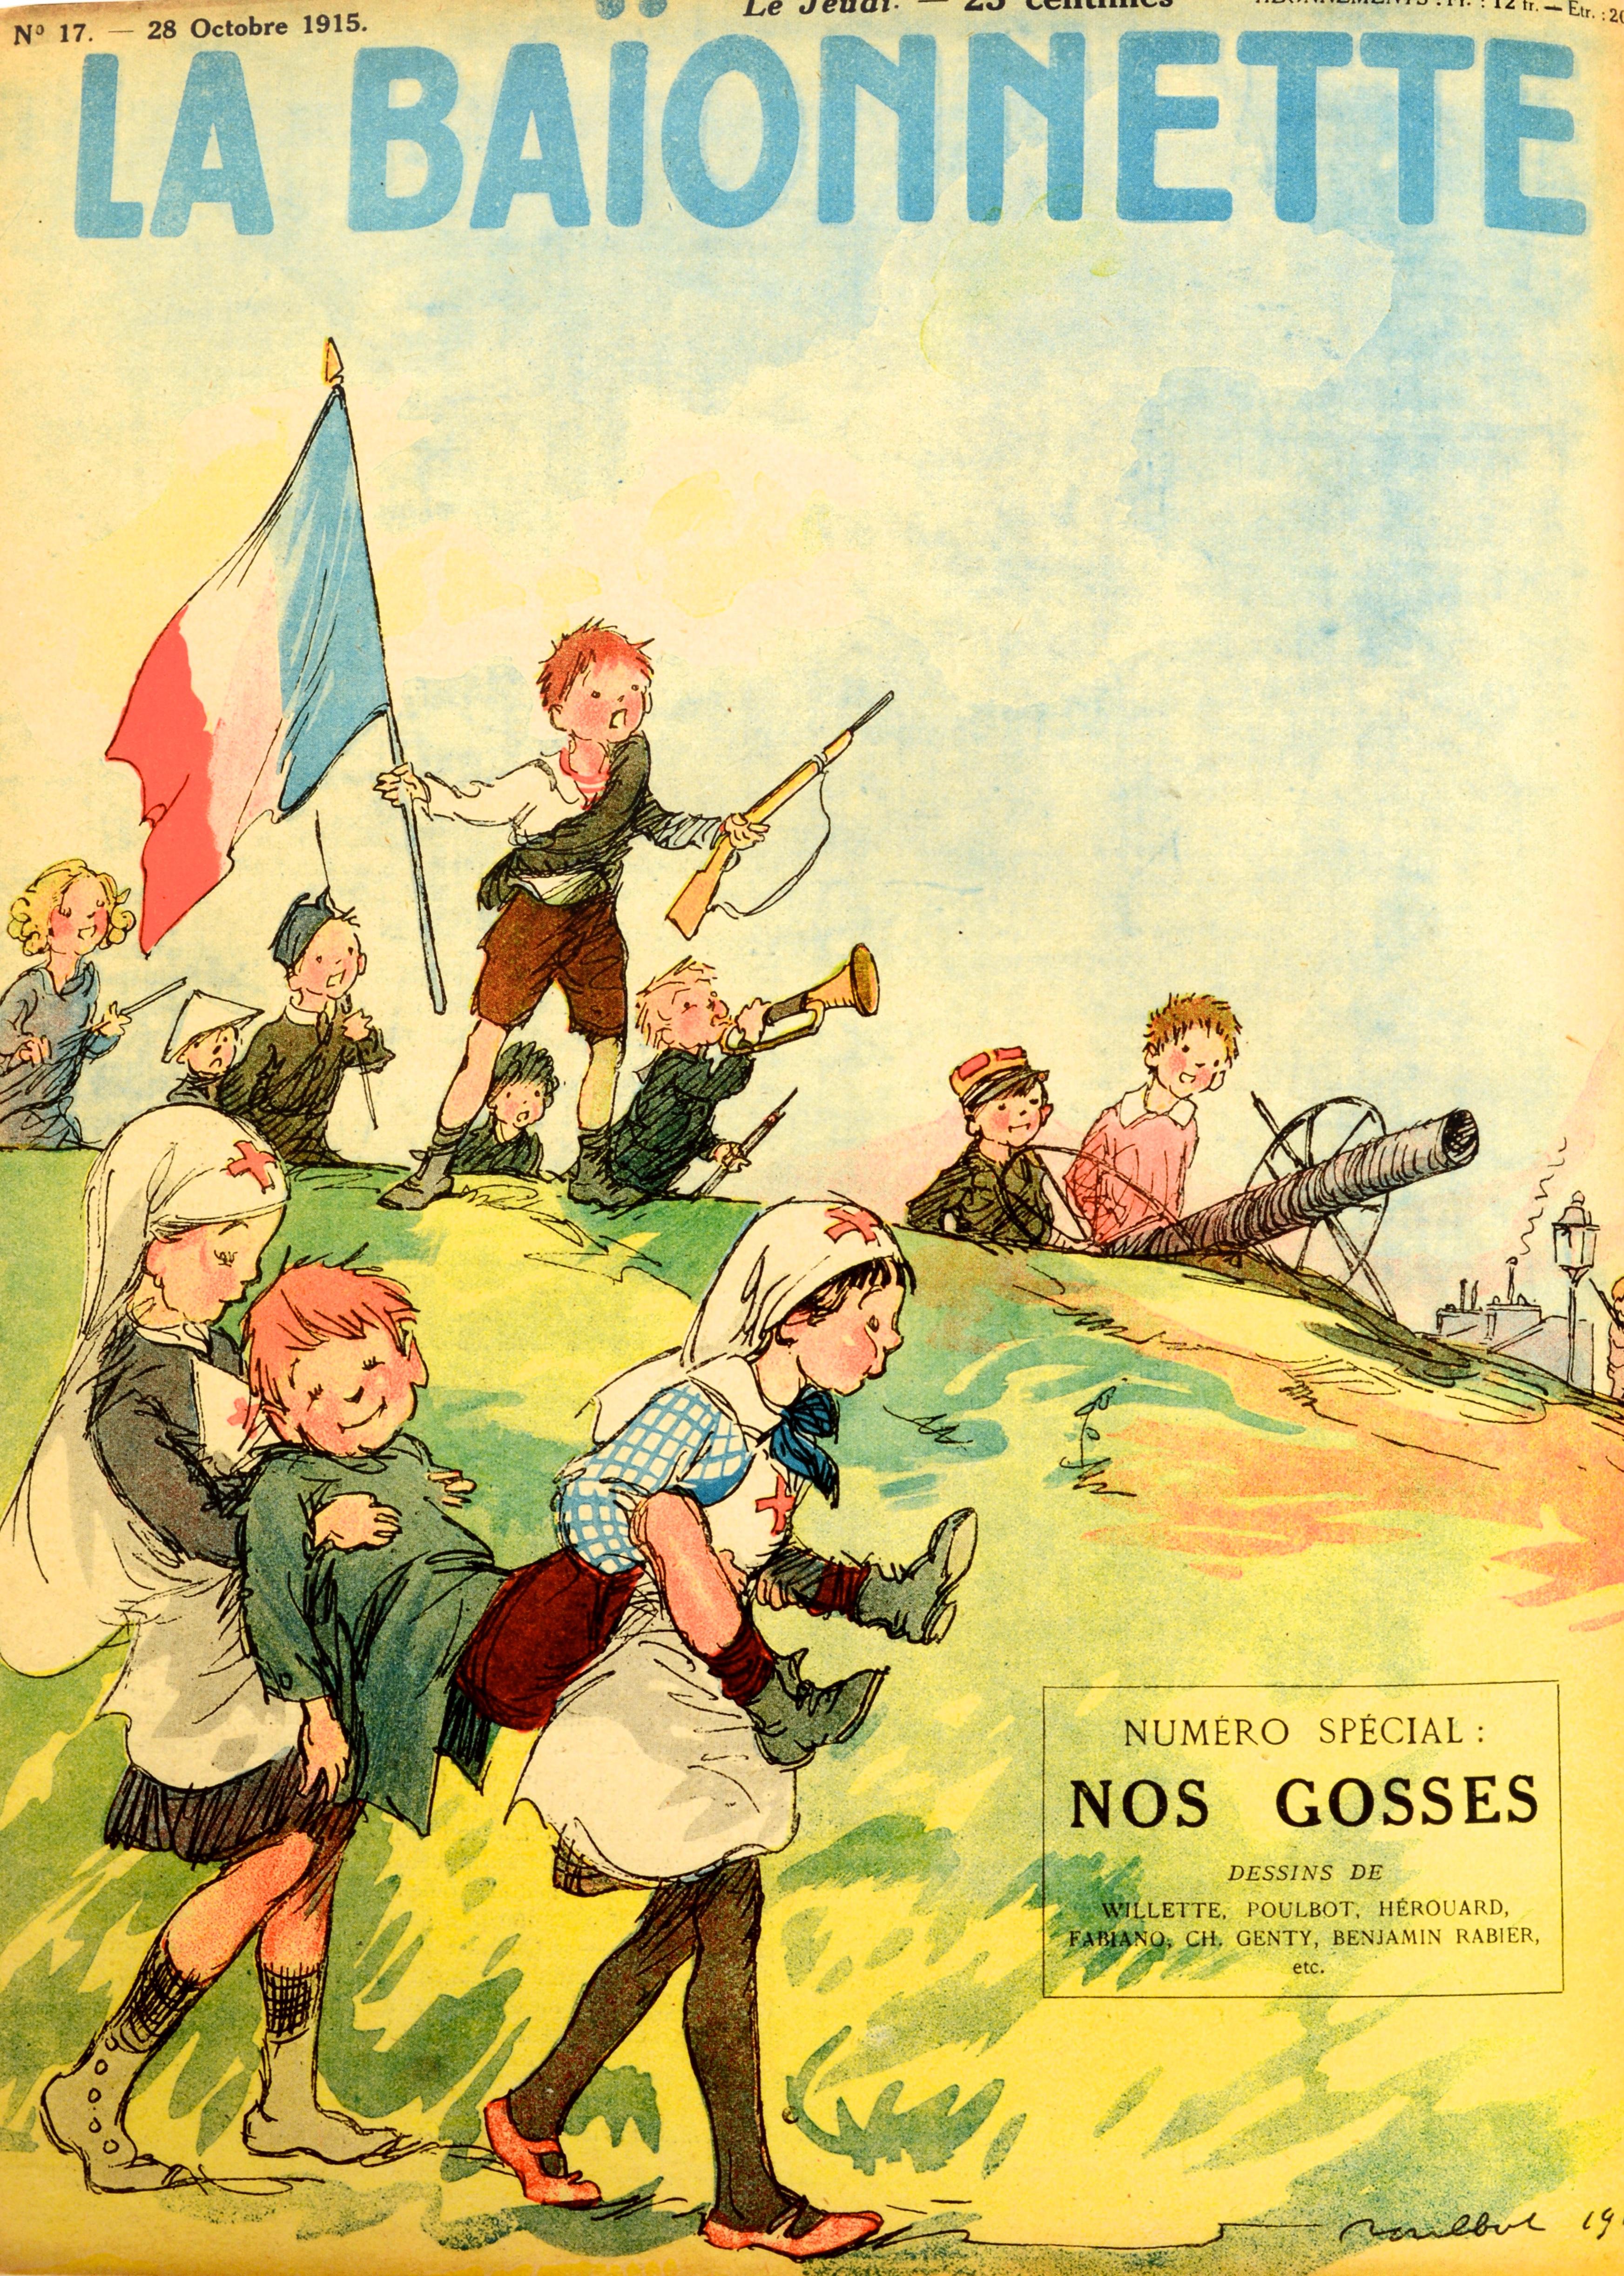 Playing Soldier: the Books and Toys That Prepared Children for War, 1871–1918 2